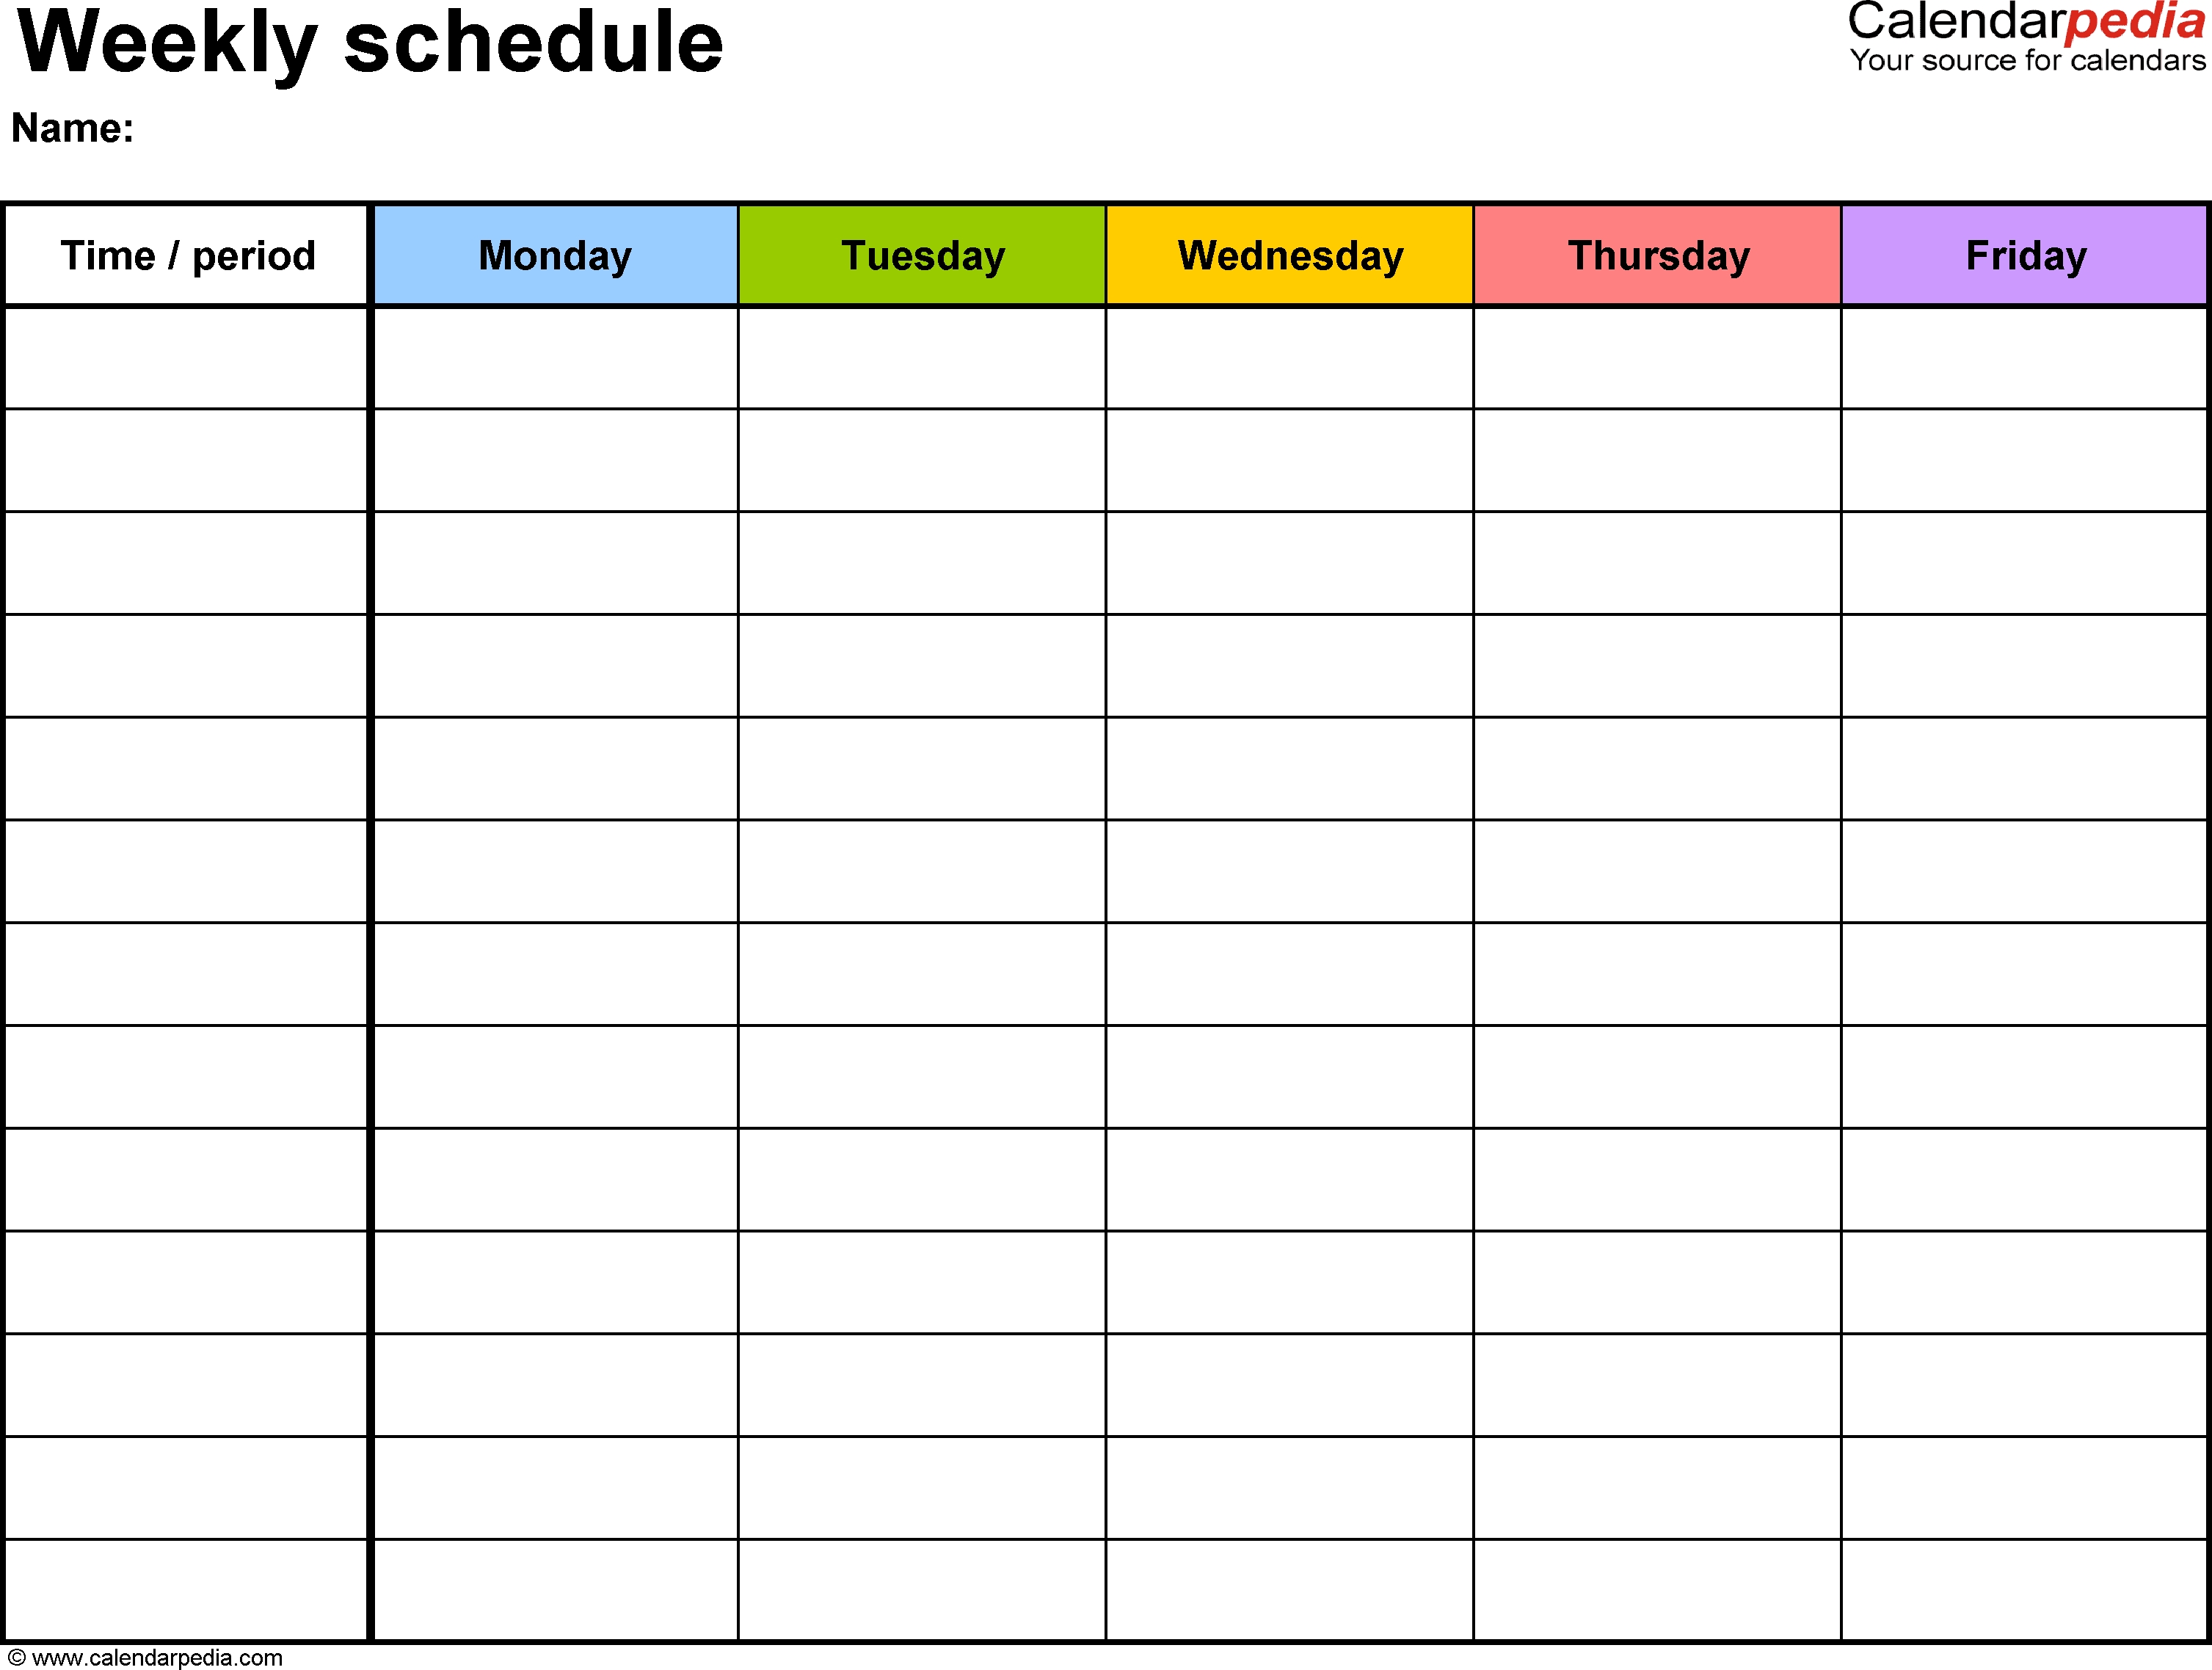 Free Weekly Schedule Templates For Word - 18 Templates Calendar Template To Fill In